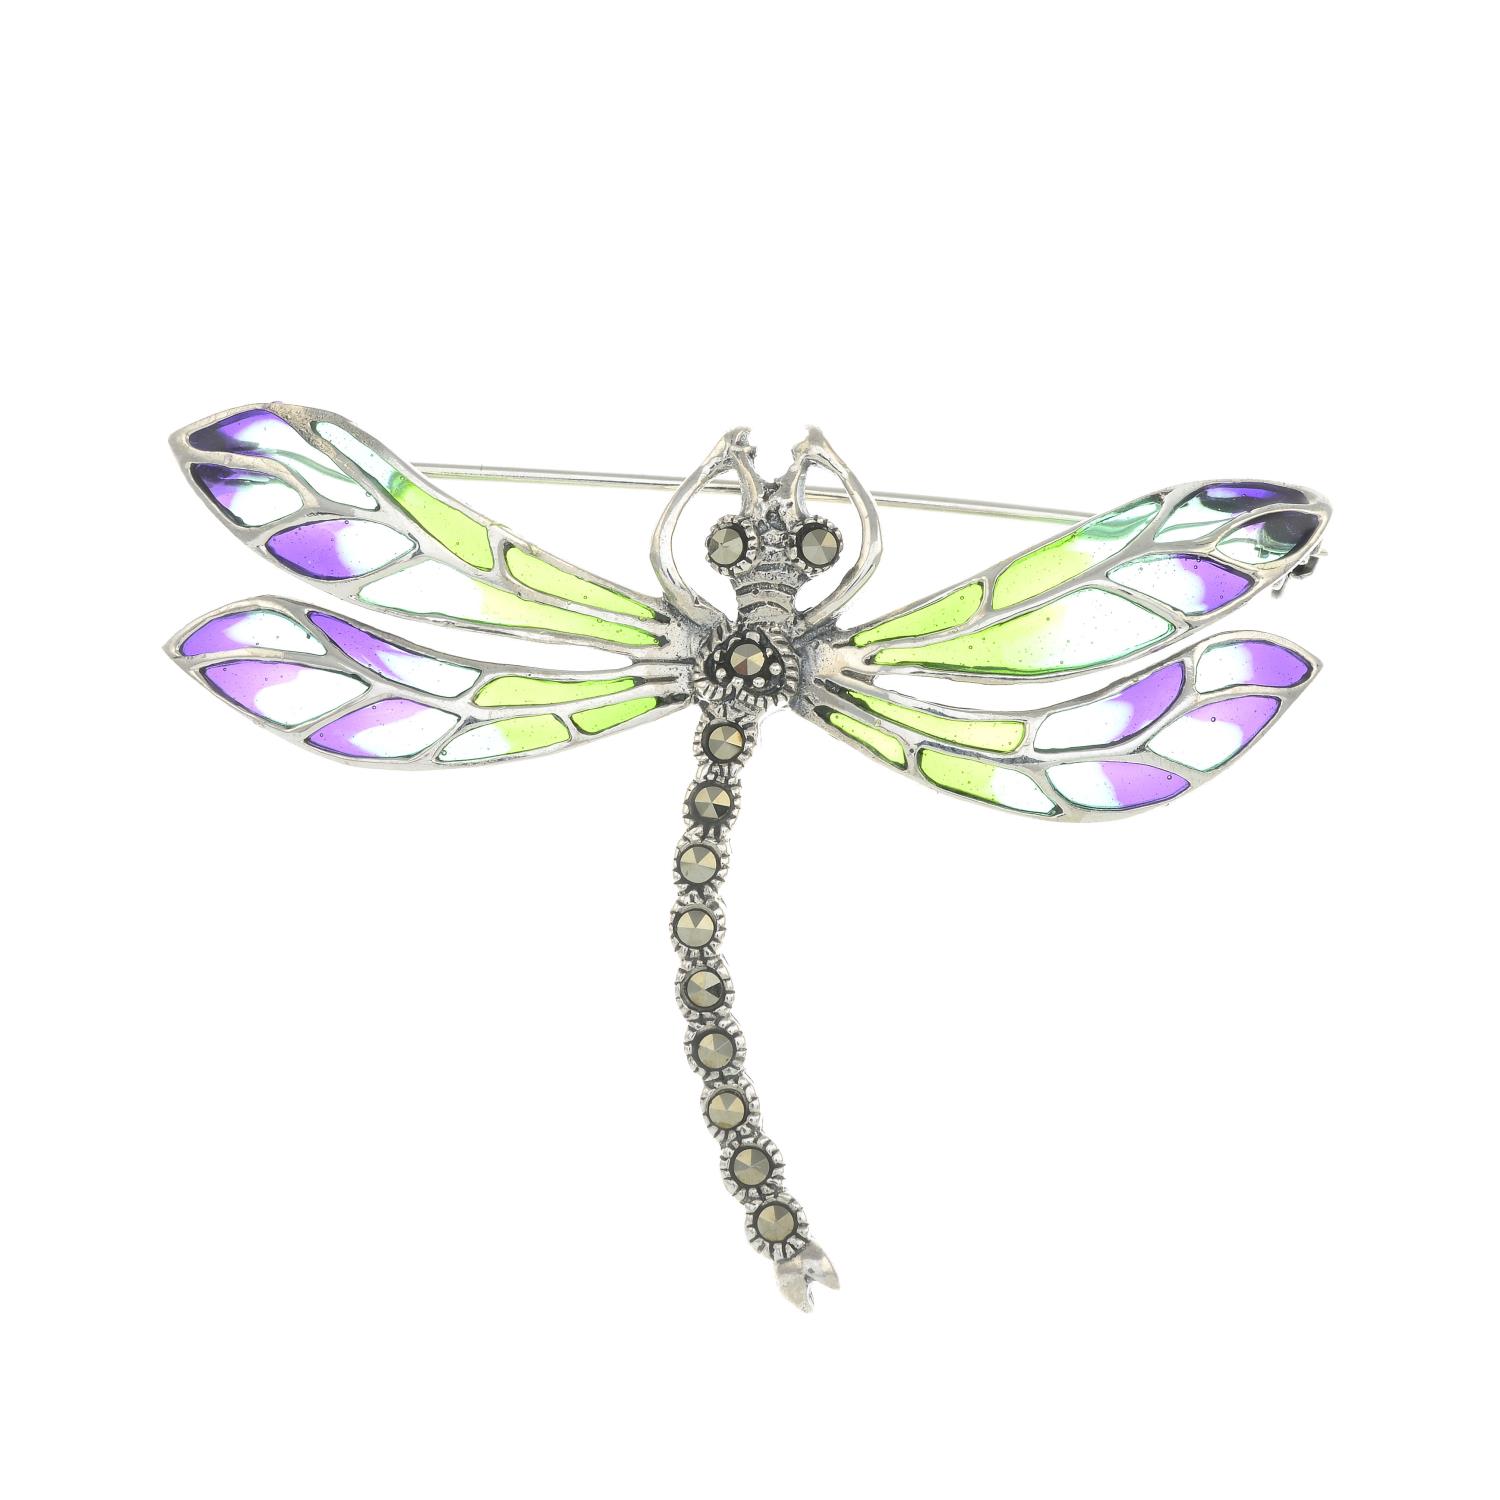 A pyrite and plique-a-jour enamel brooch, depicting a dragonfly.May be worn as a pendant.